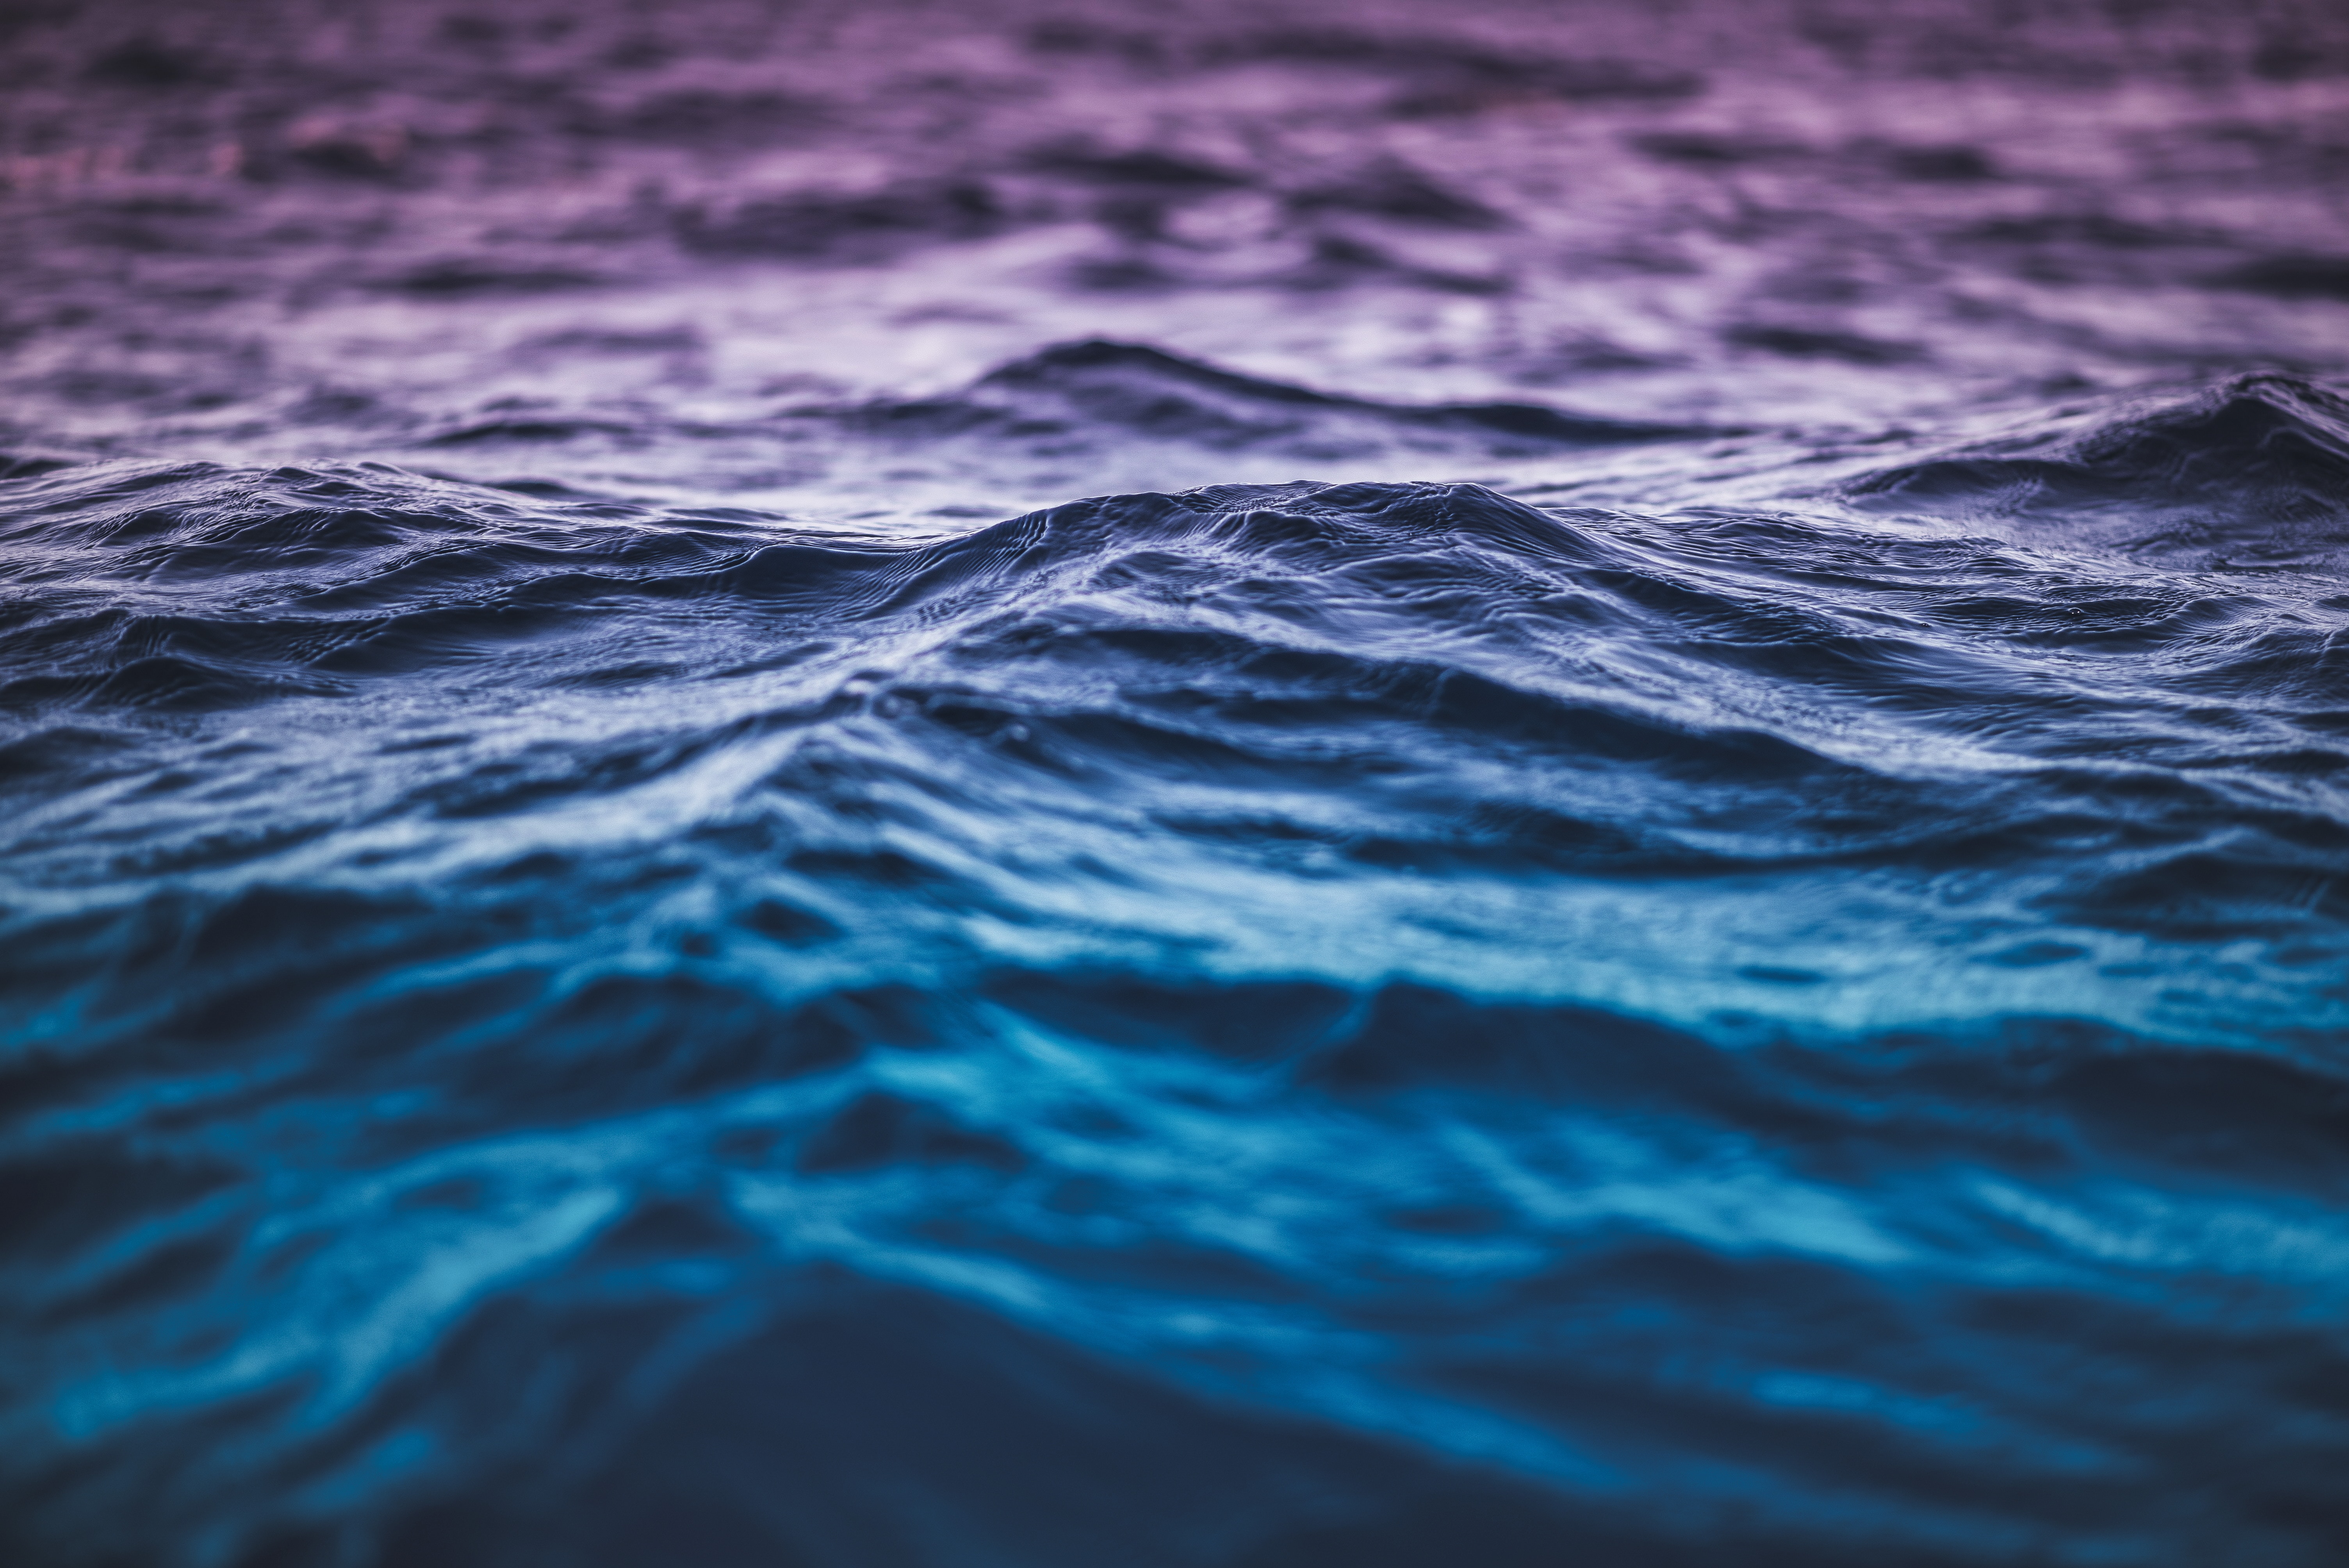 60684 download wallpaper water, sea, waves, miscellanea, miscellaneous, ripples, ripple screensavers and pictures for free